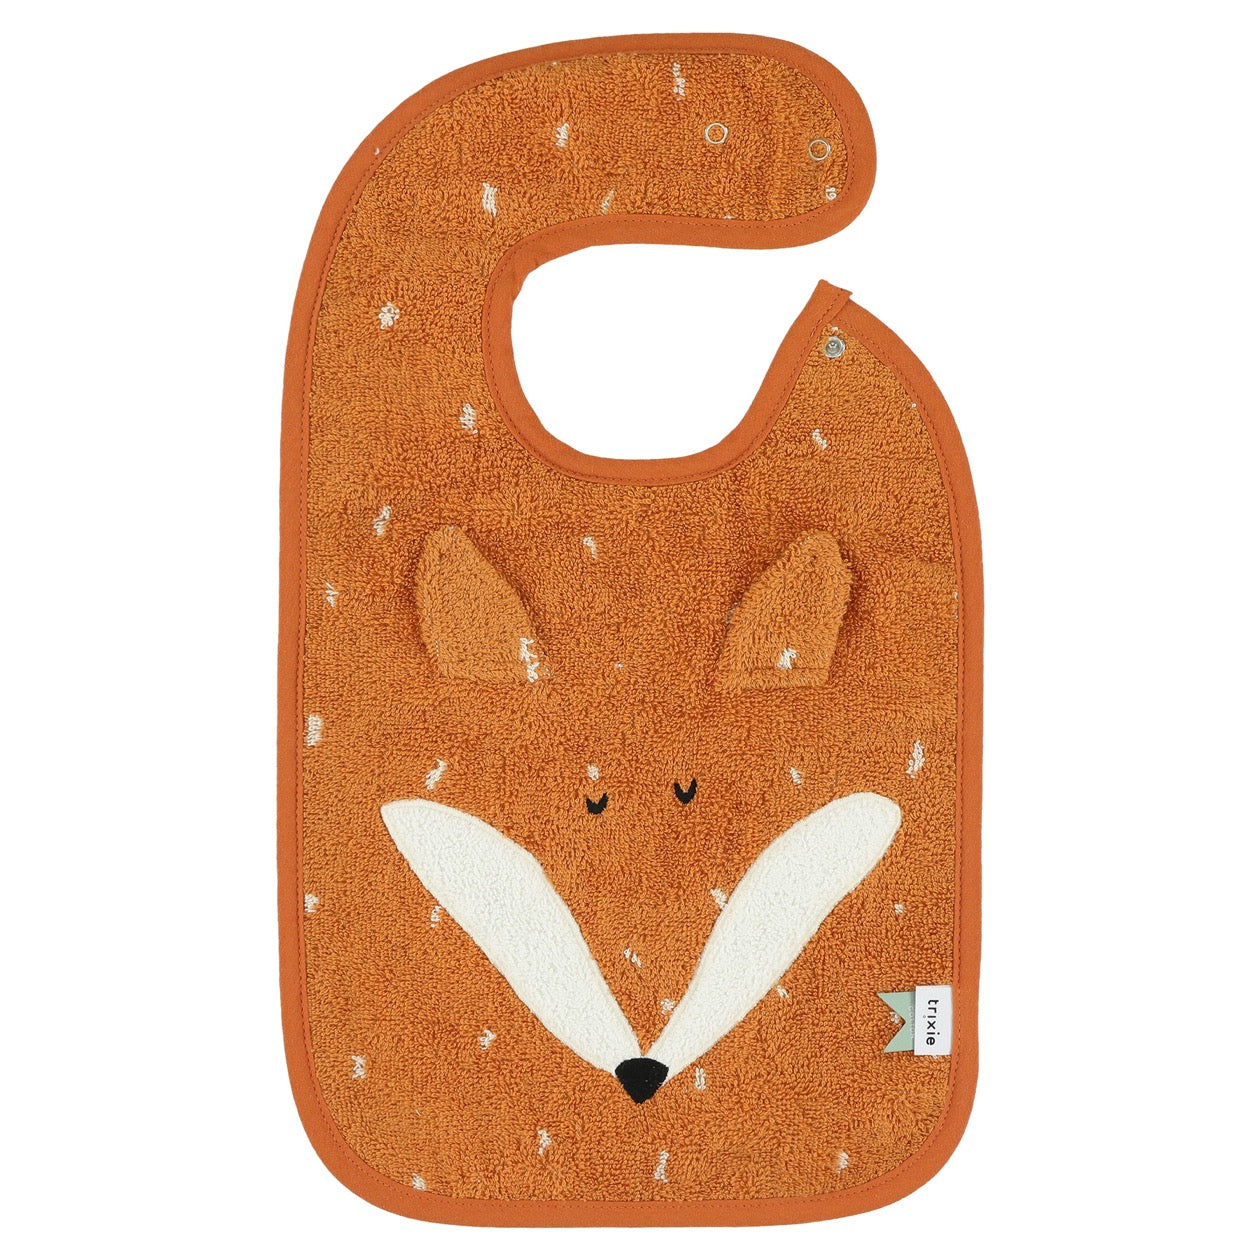 Orange baby bib with a fox face and ears